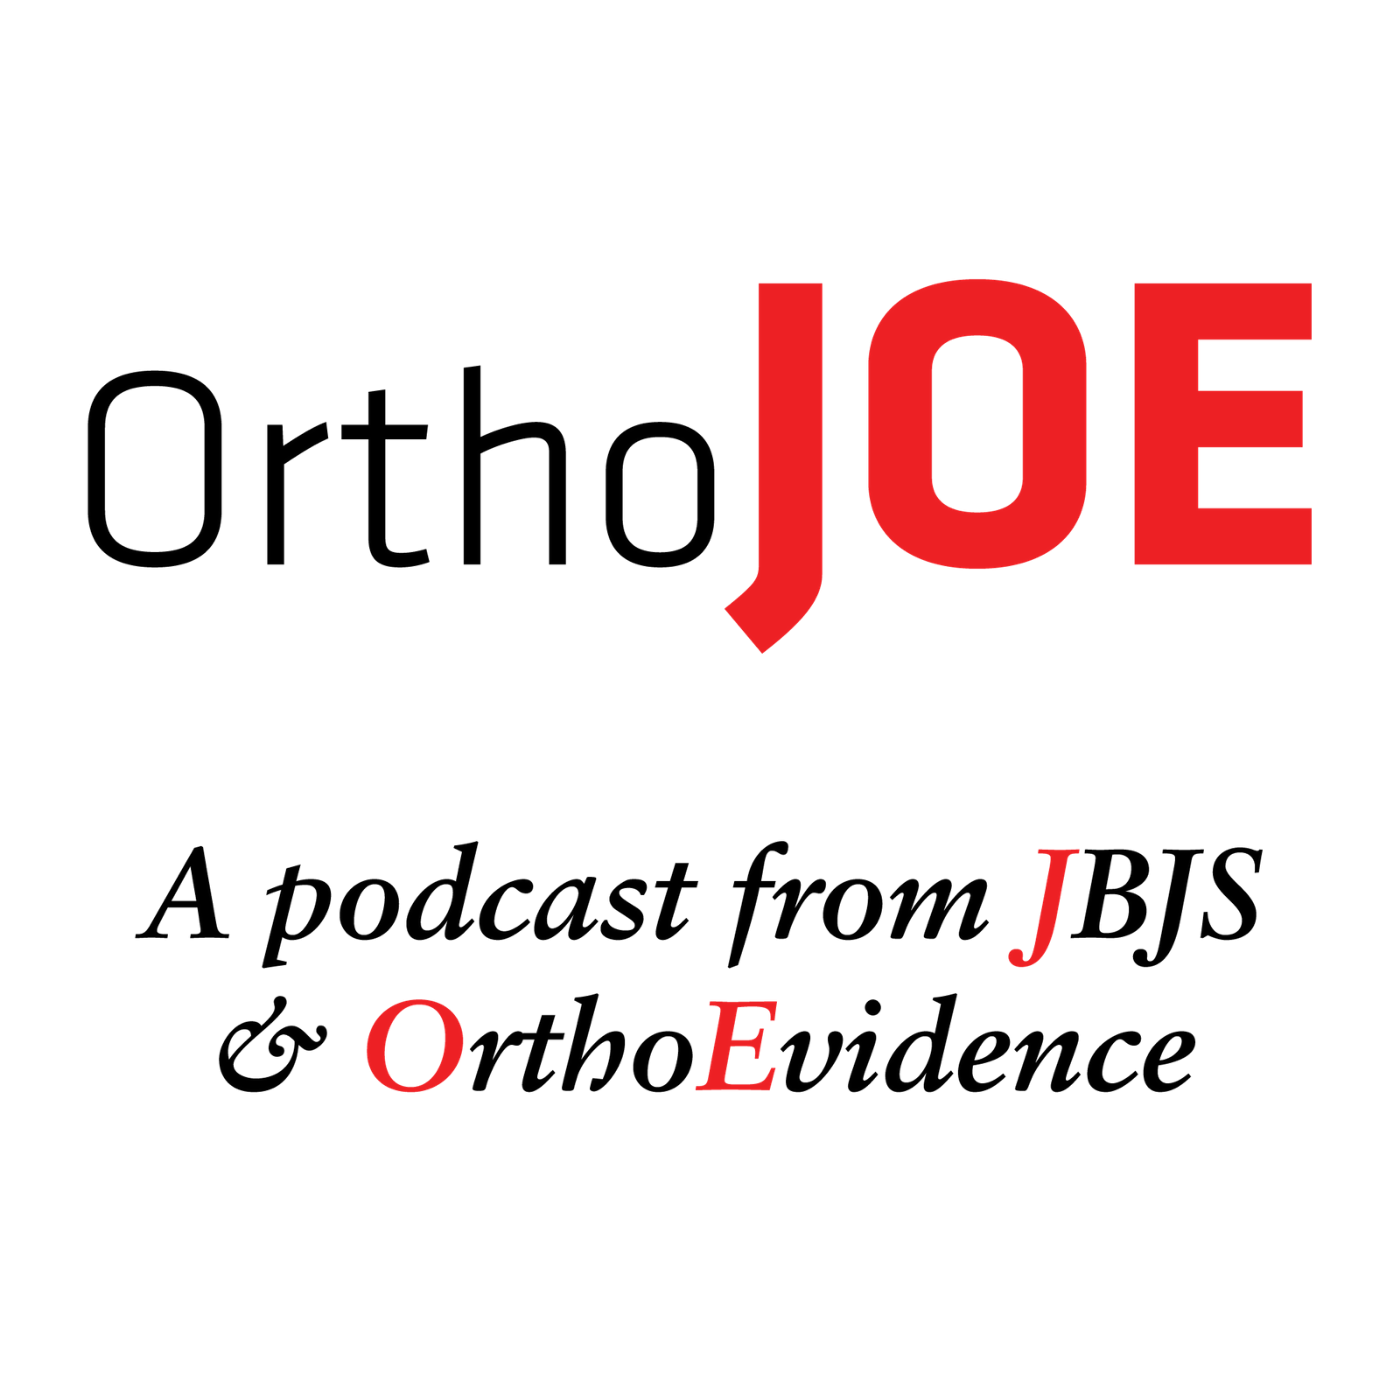 Administrative Datasets and Registries in Orthopaedic Research